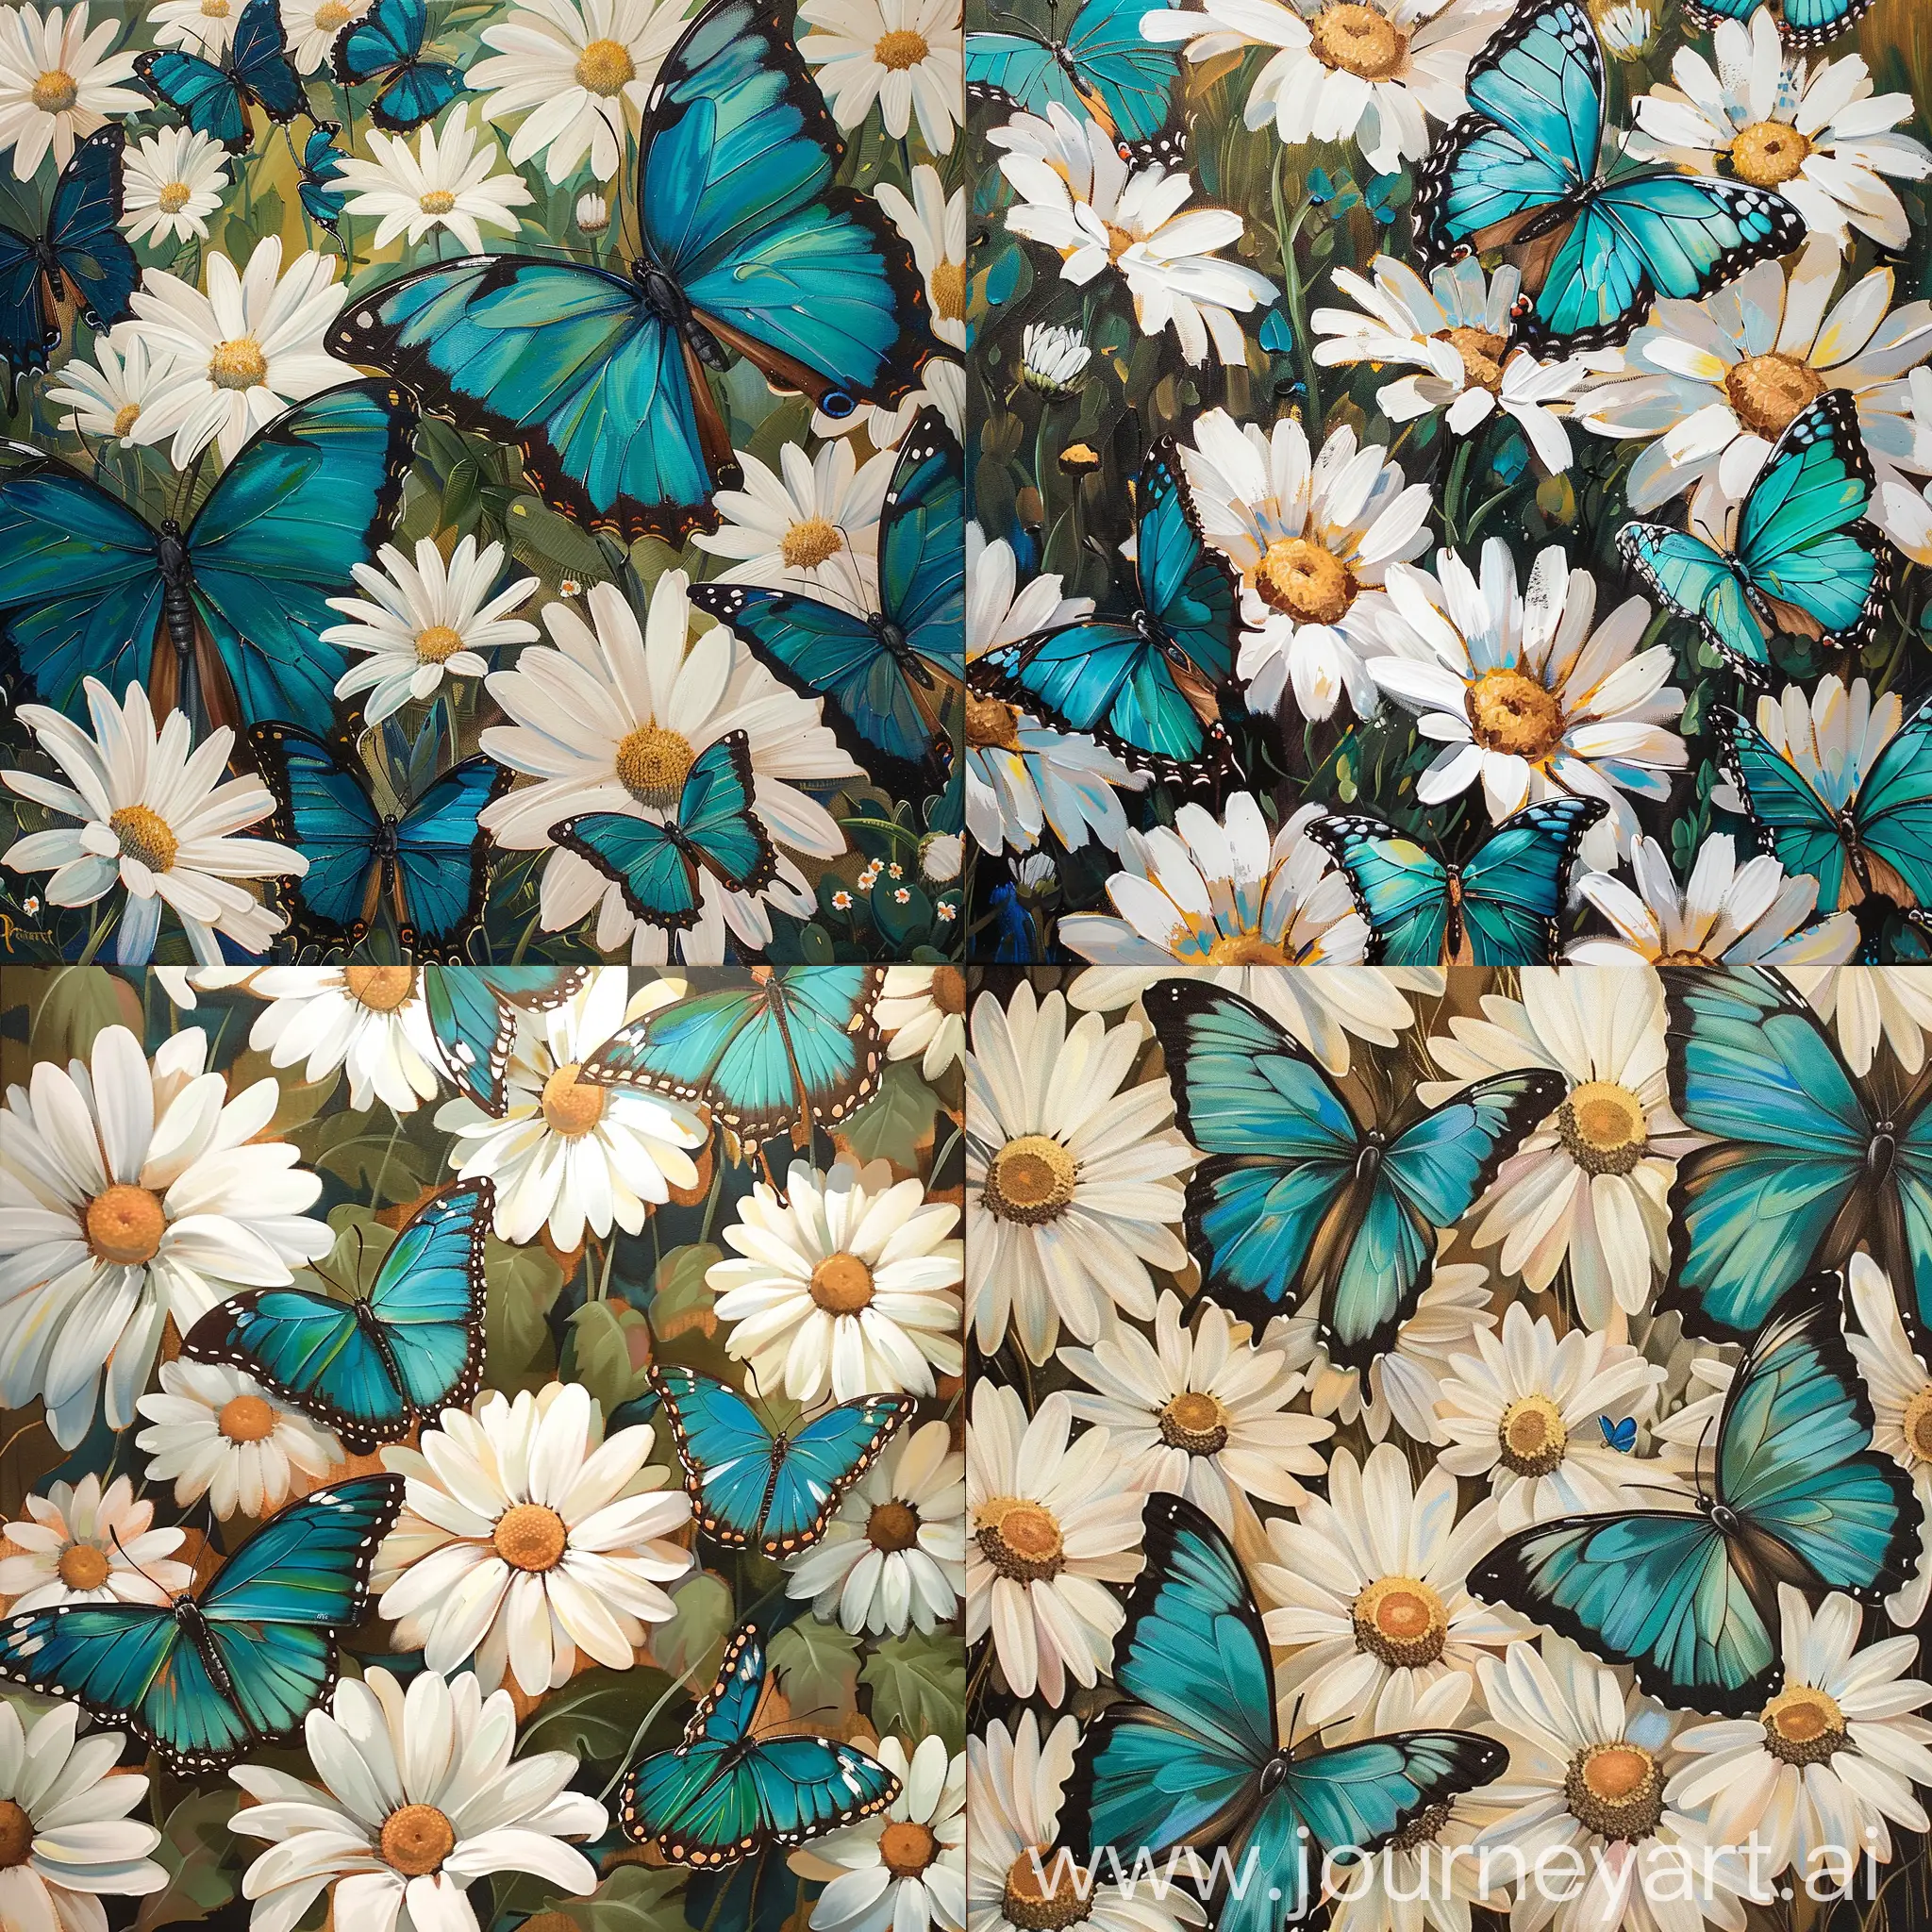 A painting full of turquoise butterflies next to white daisies